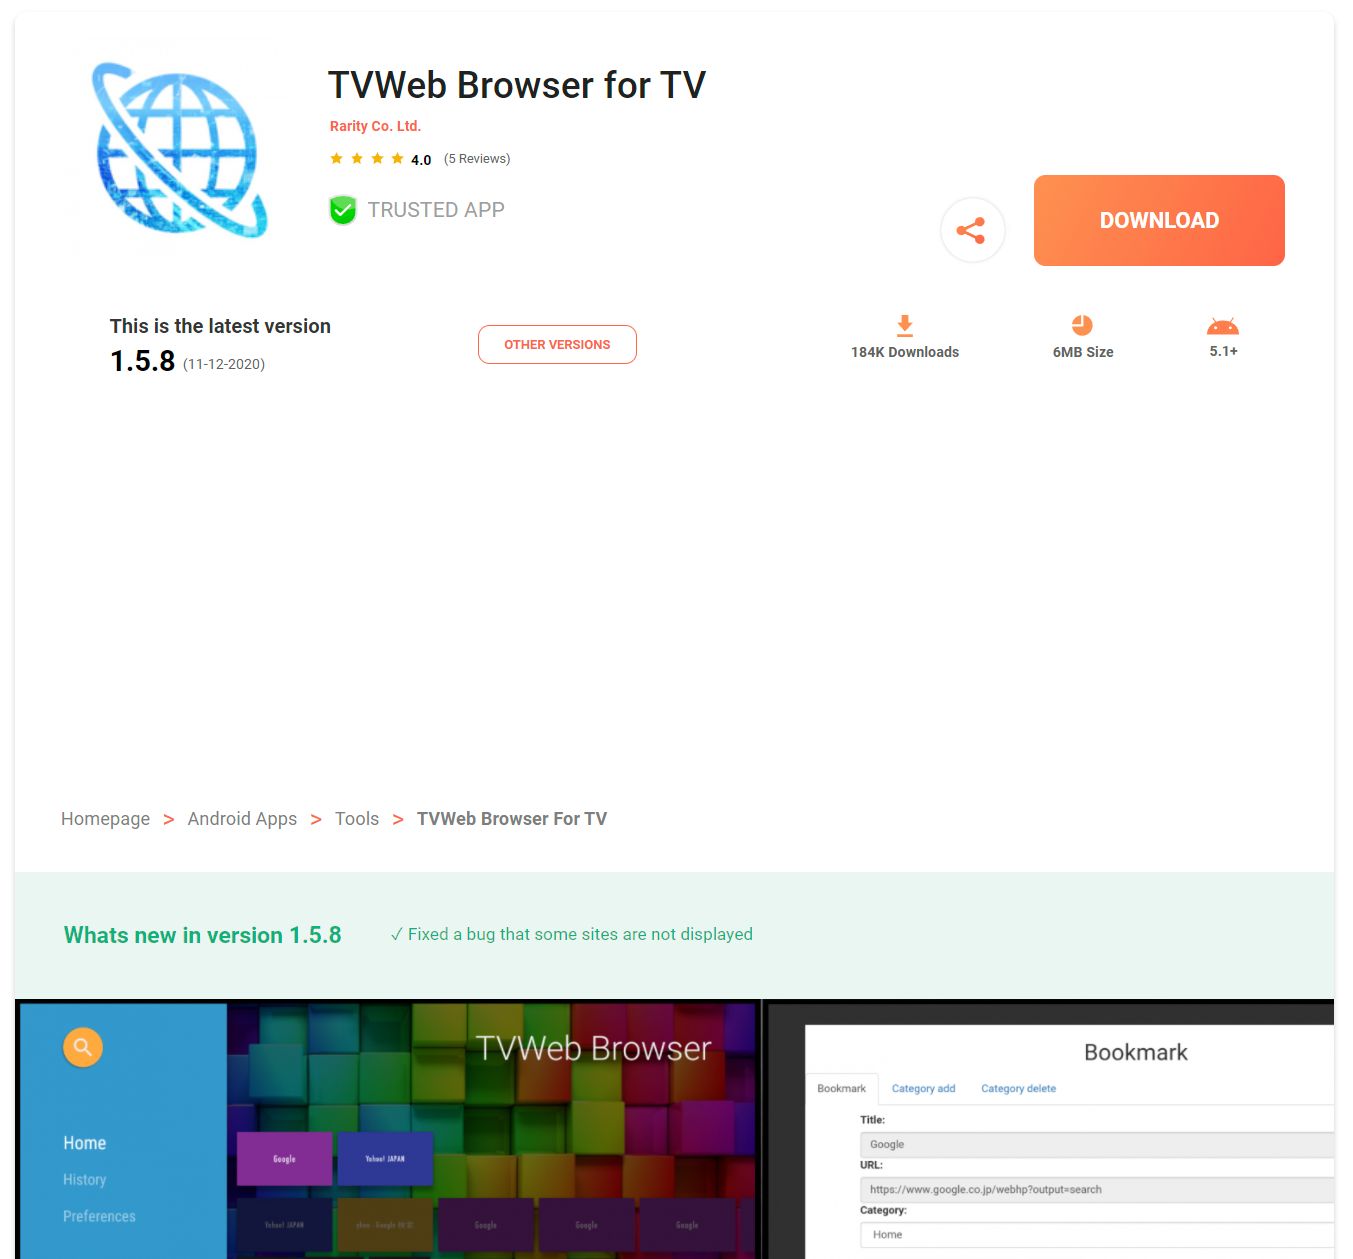 TVWeb Browser App - A great browser for the TV